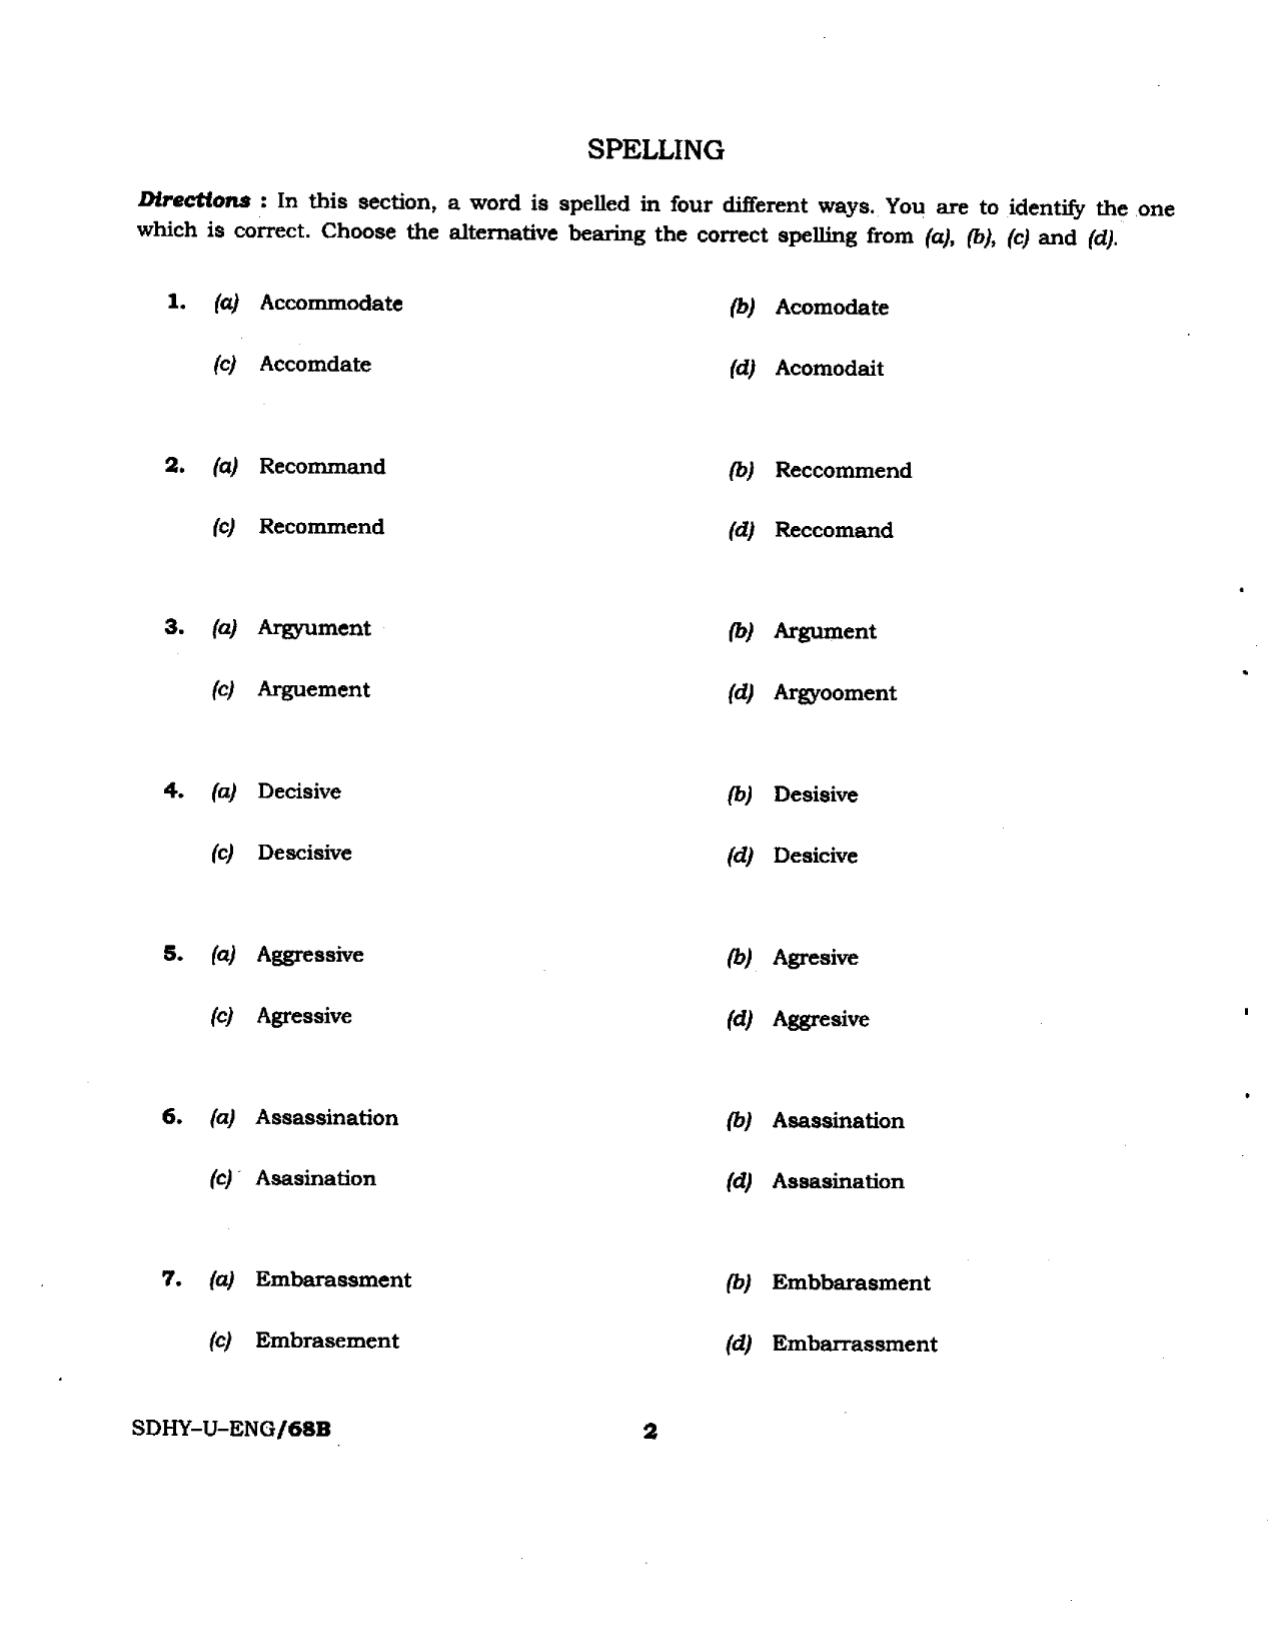 PSPCL General English Model Question Paper - Page 2